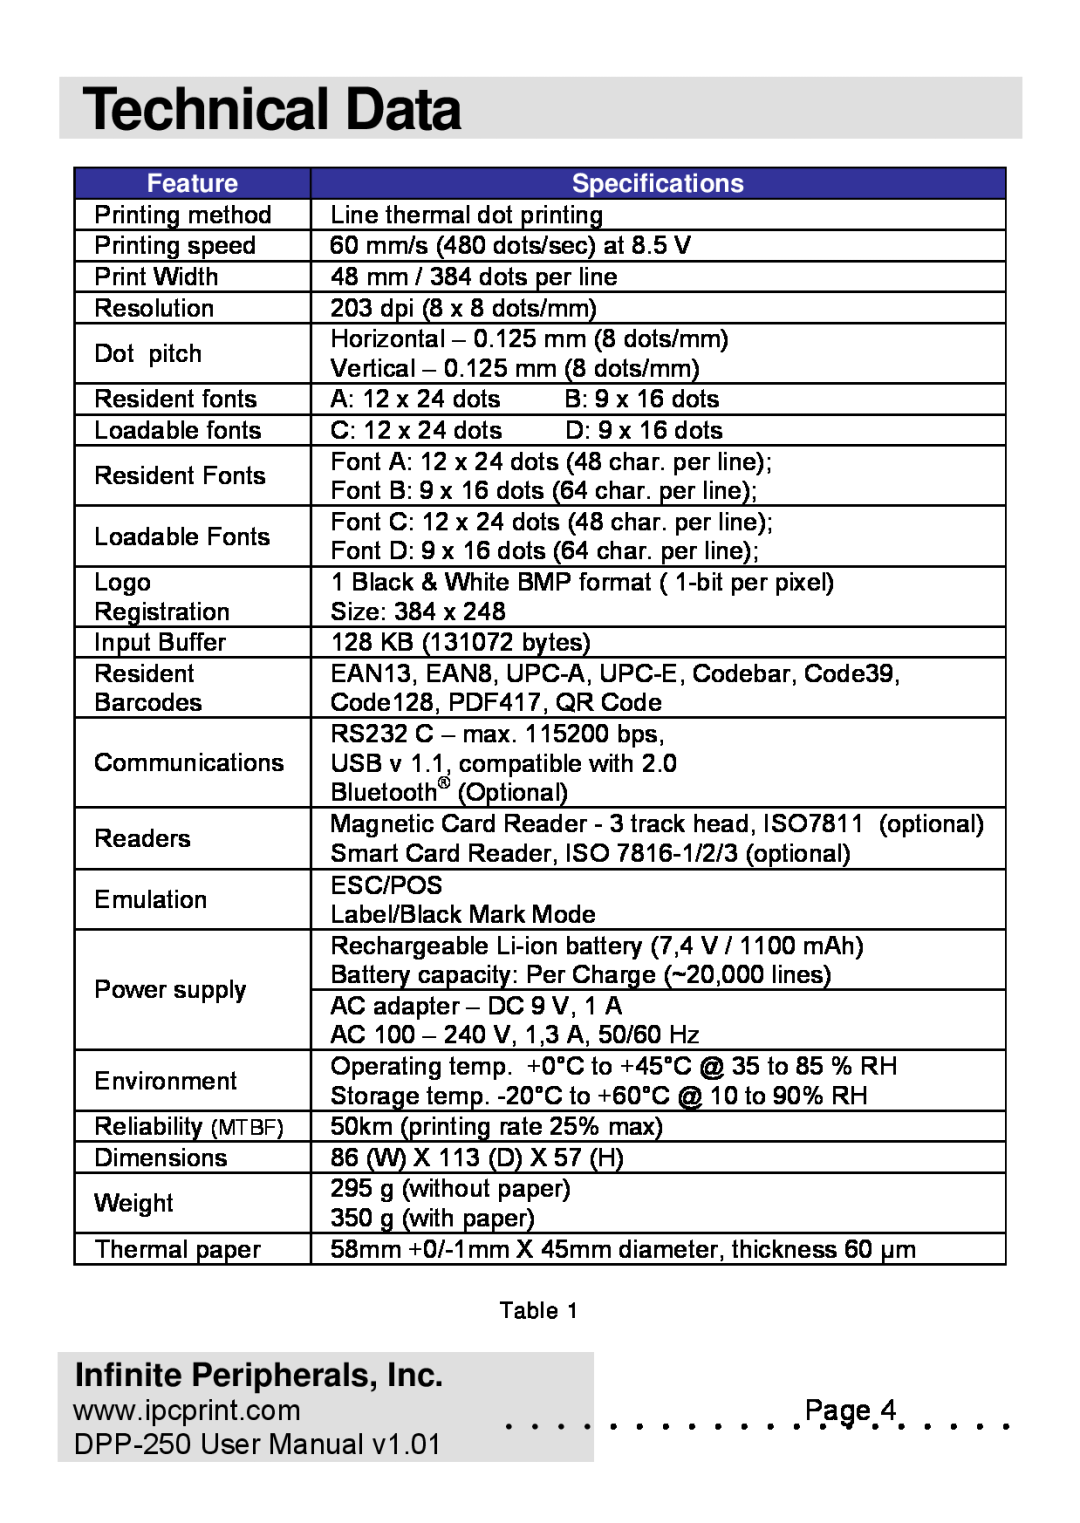 Infinite Peripherals user manual Technical Data, Infinite Peripherals, Inc, DPP-250 User Manual, Feature, Specifications 